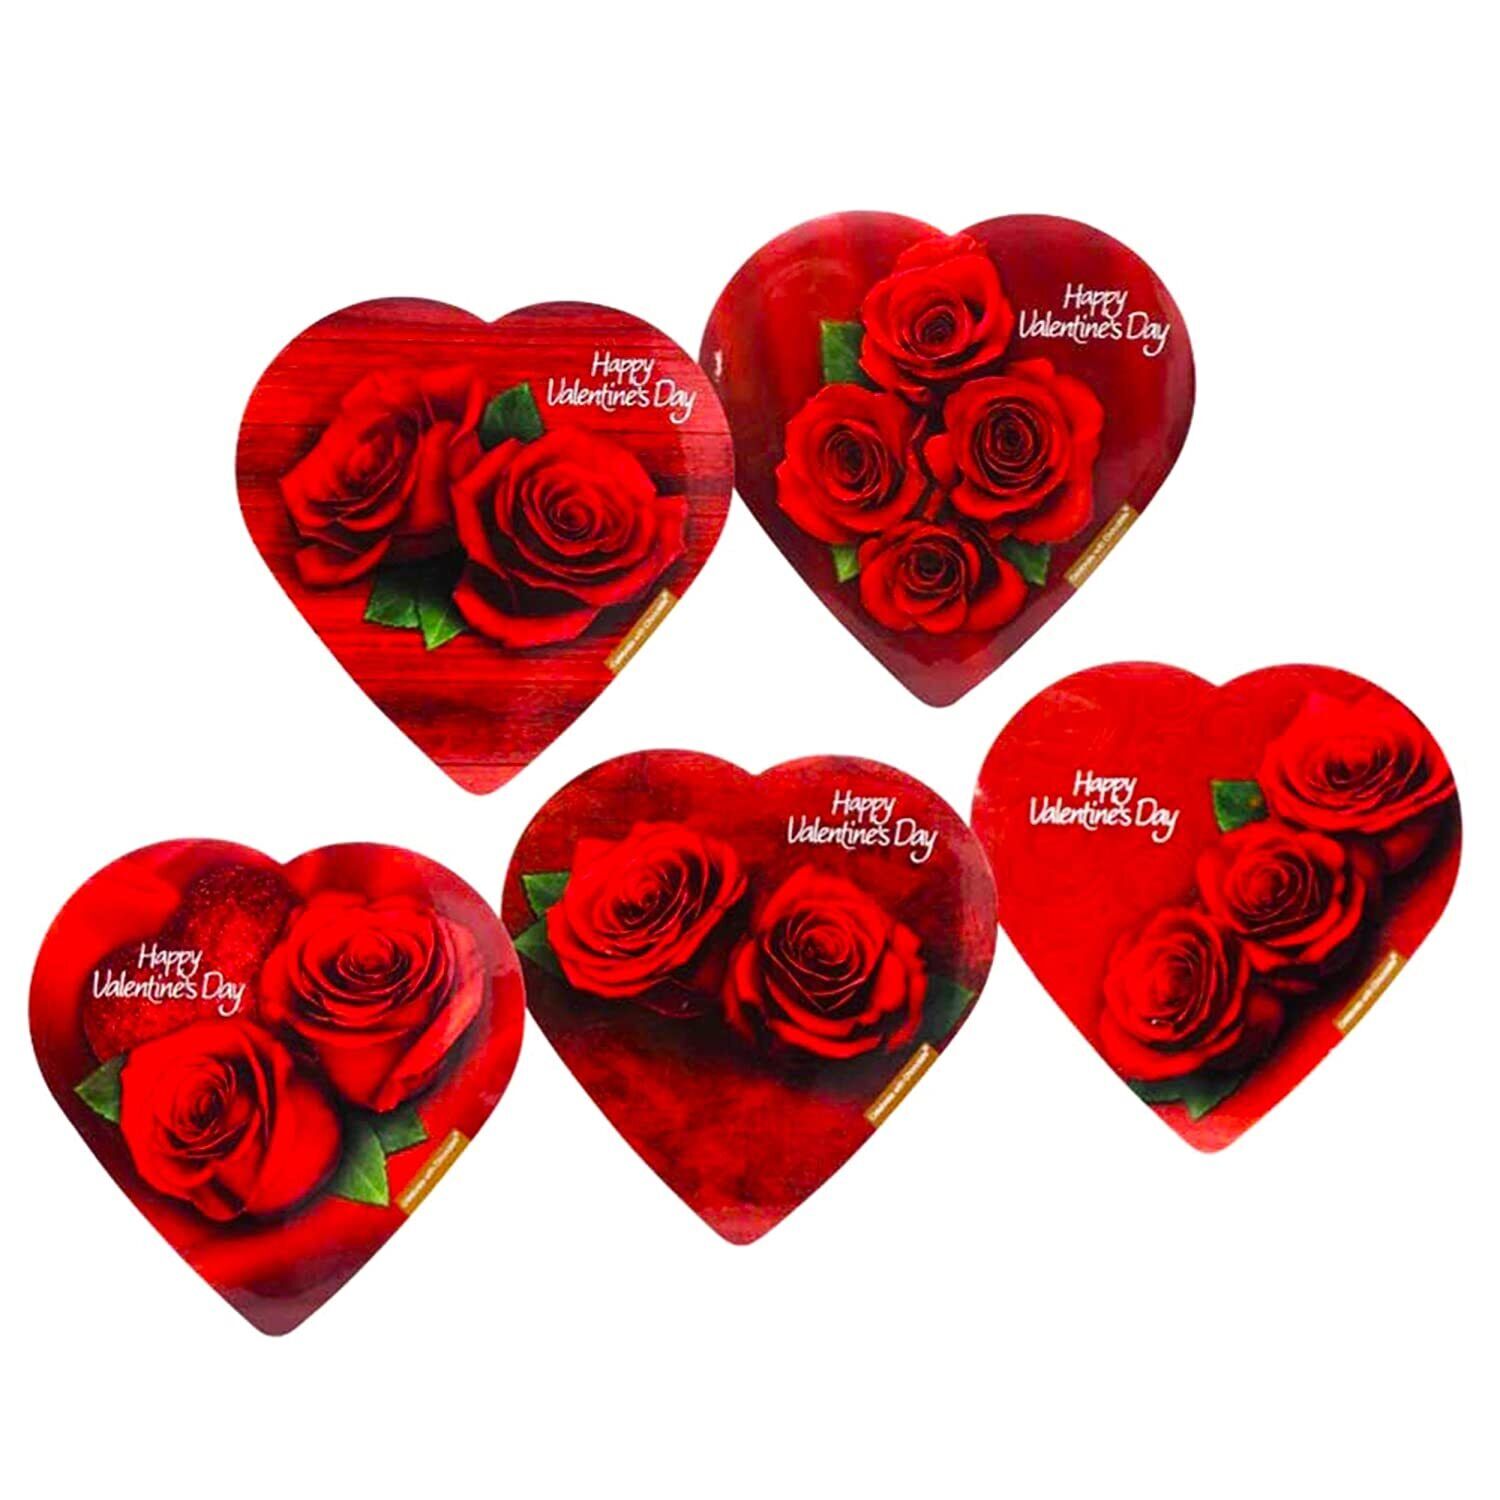 Happy Valentines Day Elmer’s Chocolate Heart Box Candies 2 oz (Assortments vary)